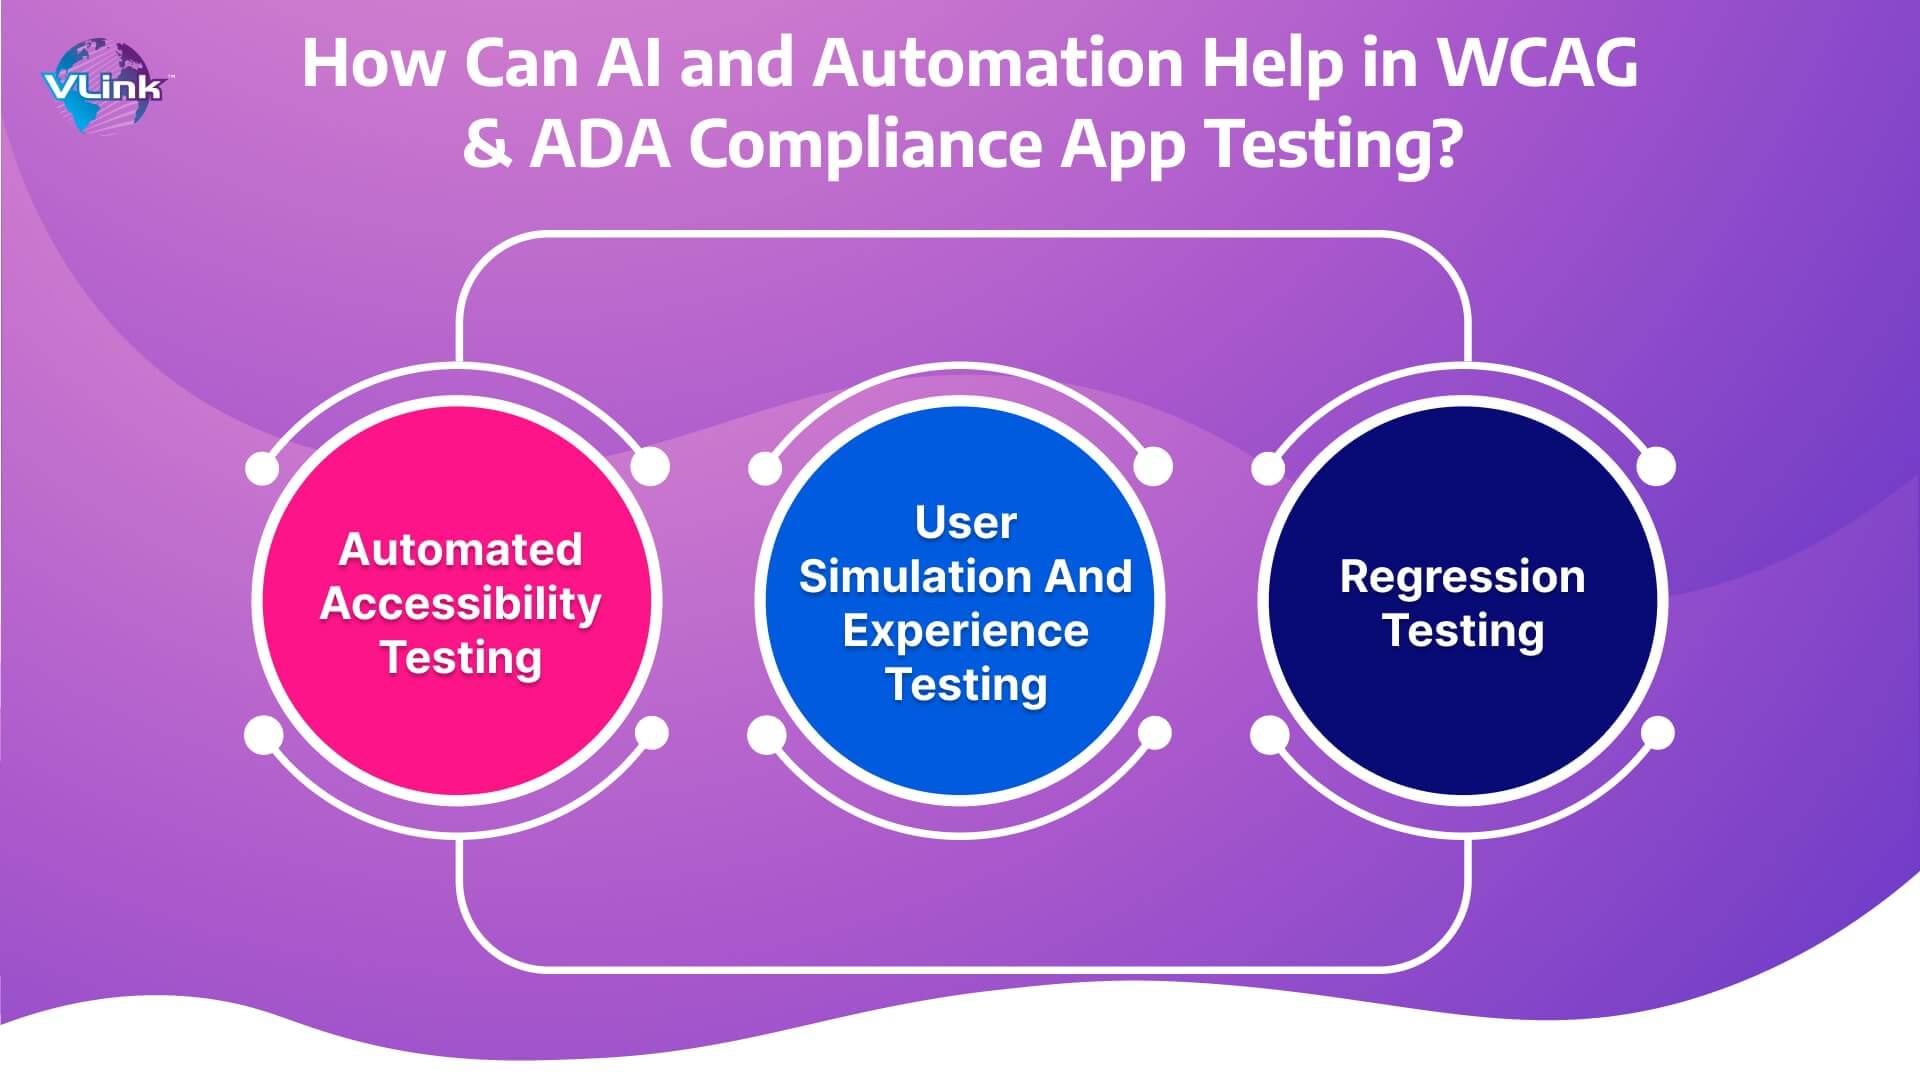 How Can AI and Automation Help in WCAG & ADA Compliance App Testing?